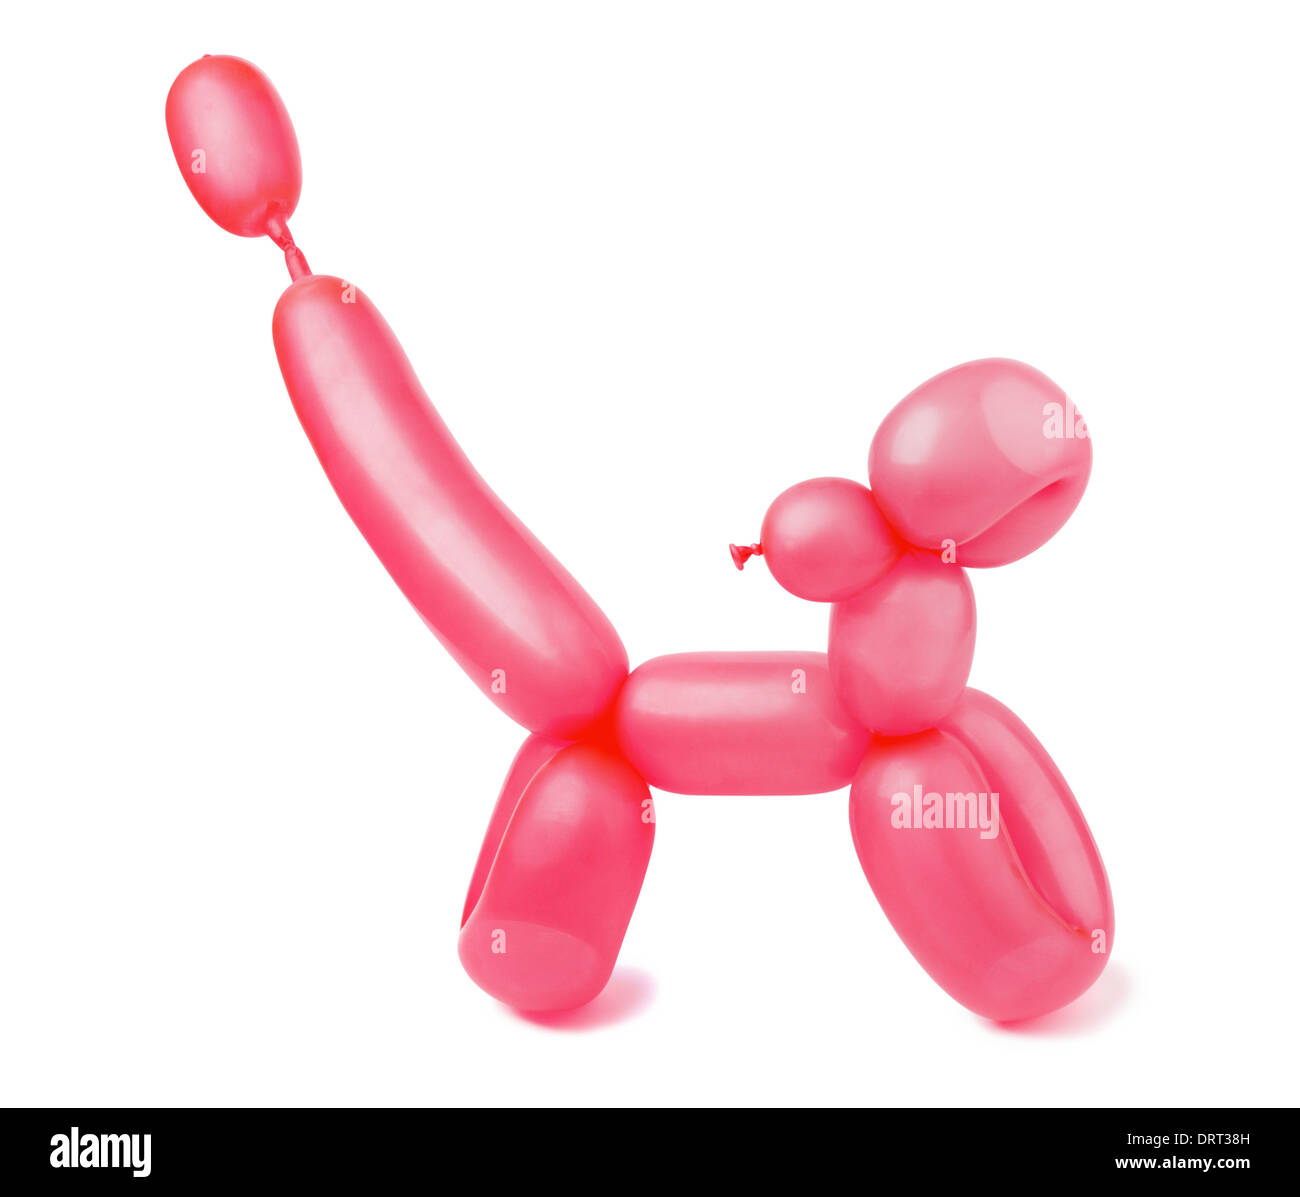 Balloon dog on a white background Banque D'Images